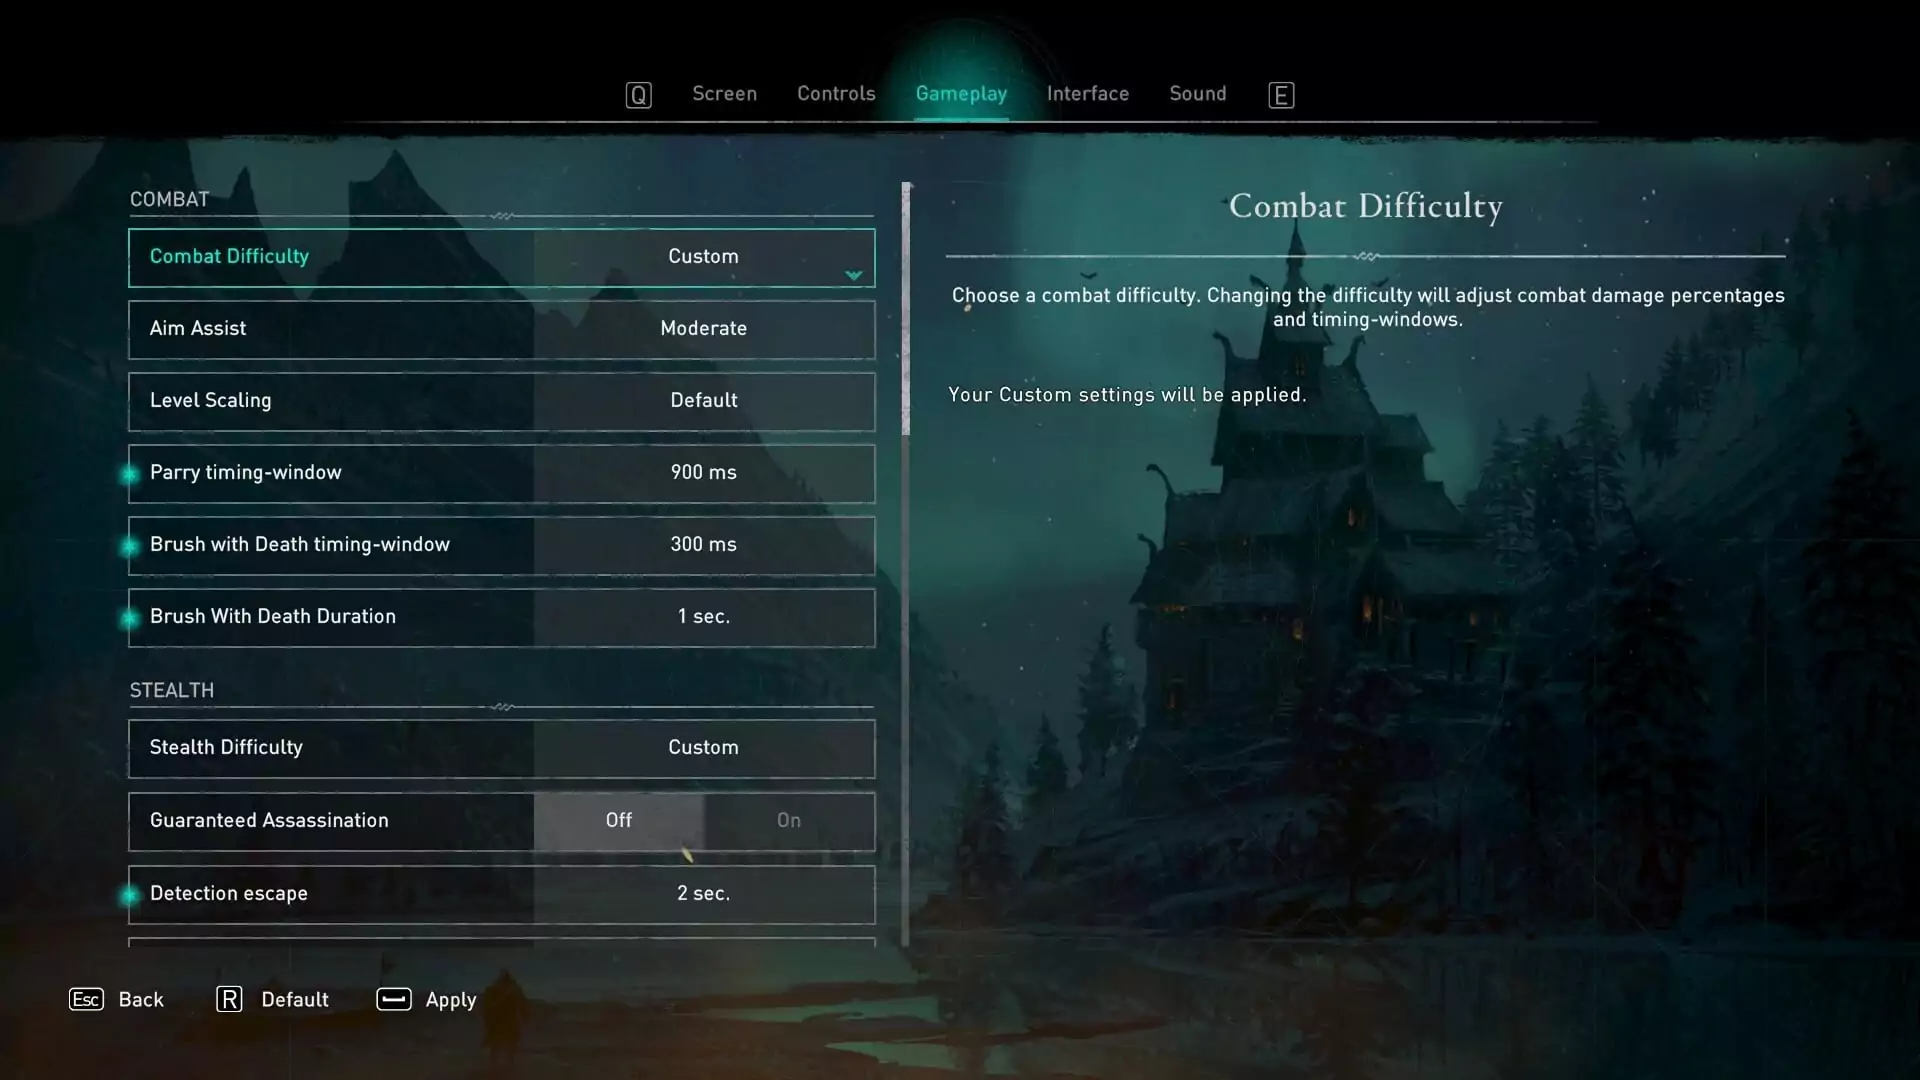 Now you can customise your difficulty level even more to your own preferences.